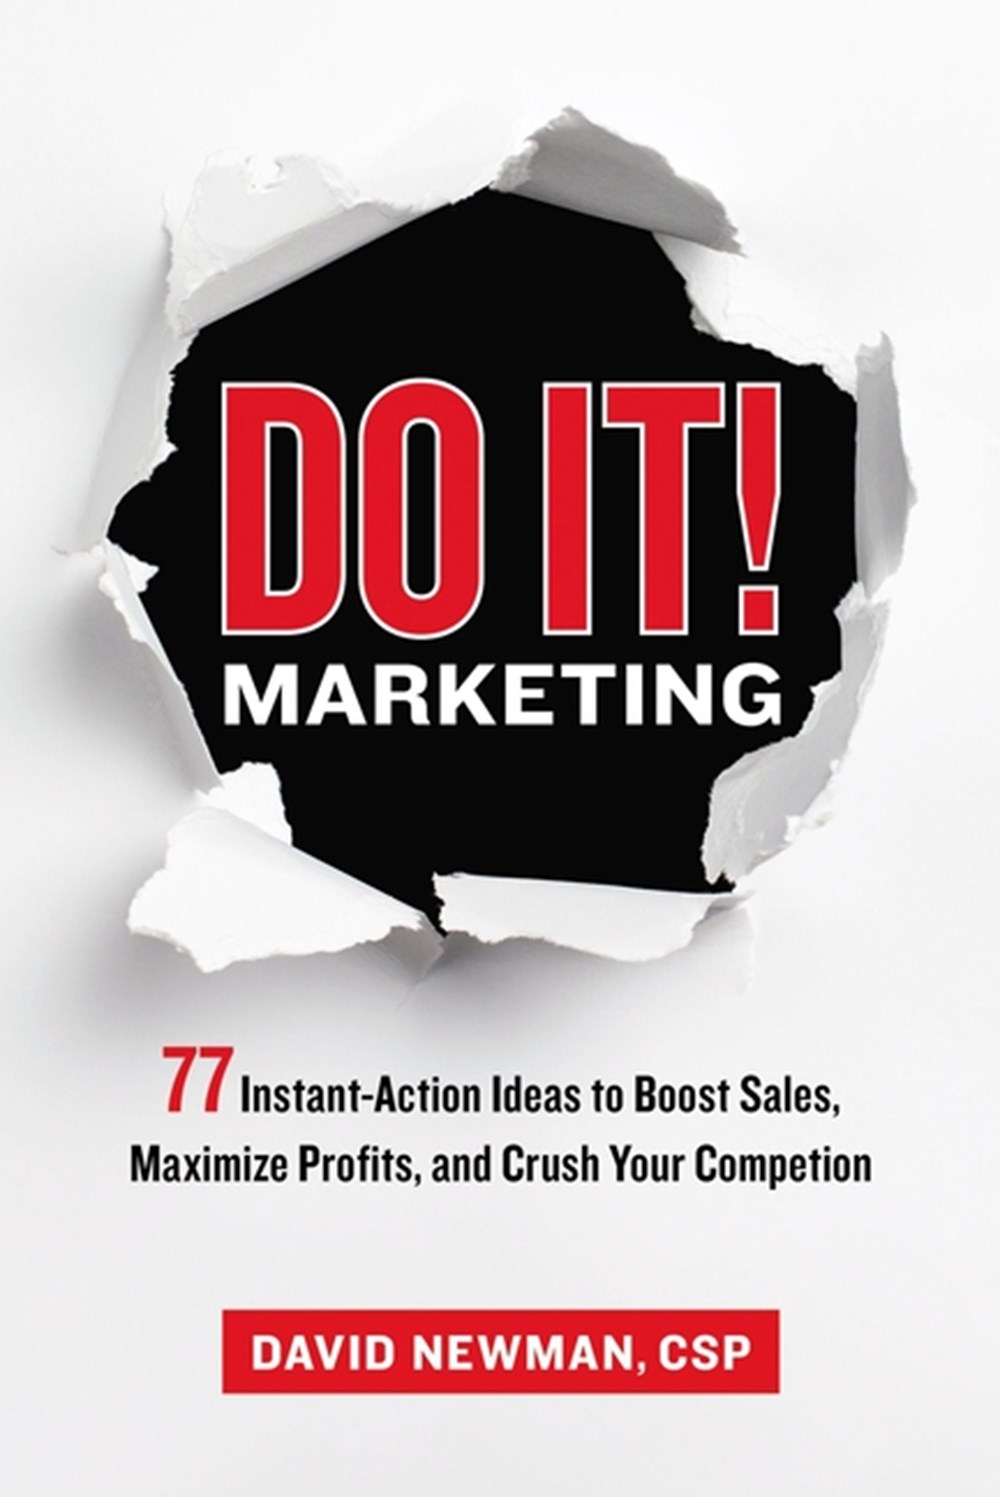 Do It! Marketing: 77 Instant-Action Ideas to Boost Sales, Maximize Profits, and Crush Your Competiti